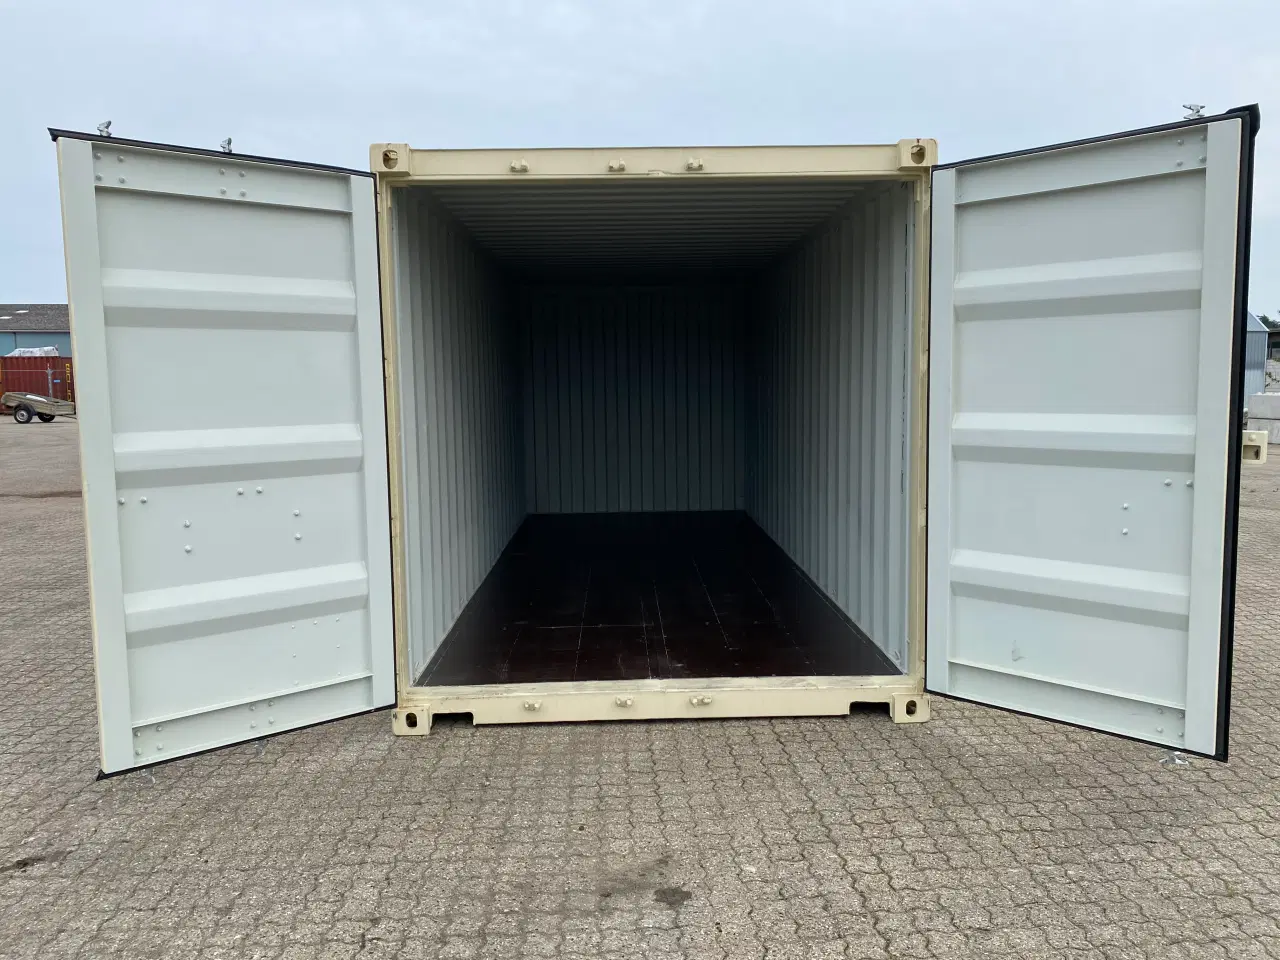 Billede 2 - 20 fods container NY One Way i Flot Ral 1015 farve